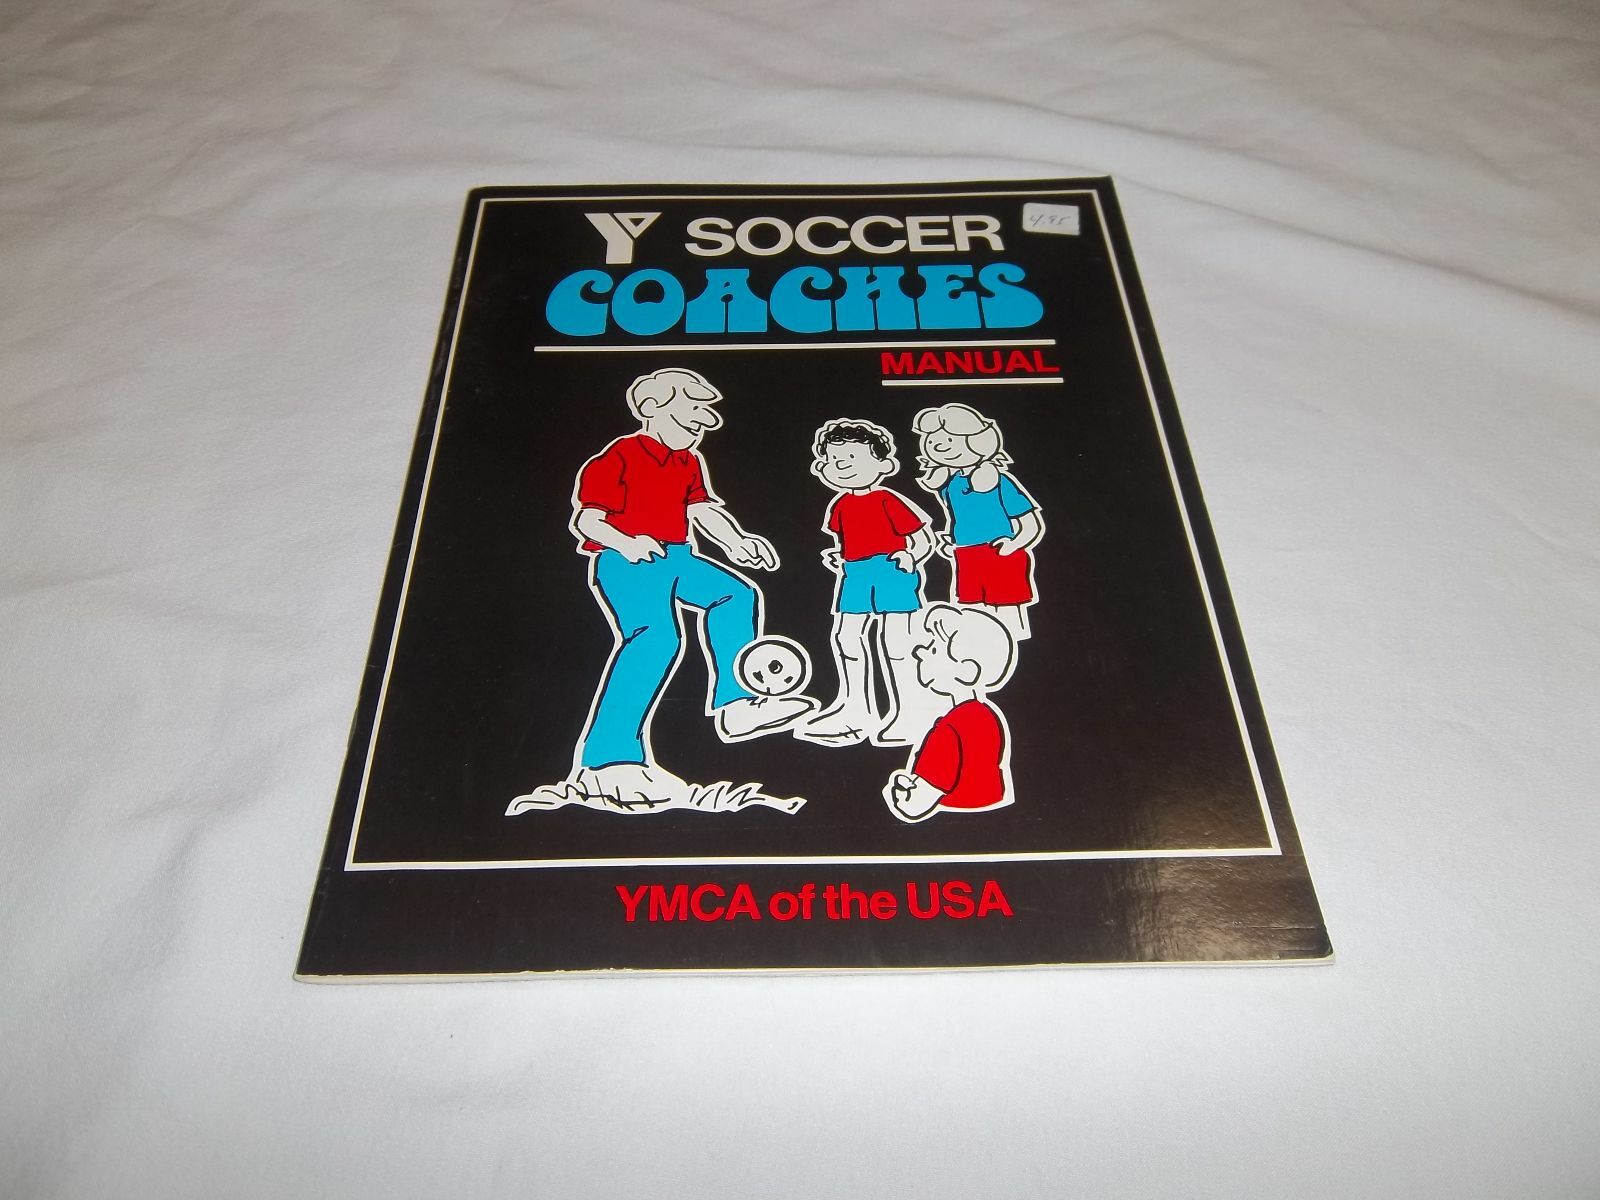 Y S0CCER COACHES MANUAL-PAPERBACK